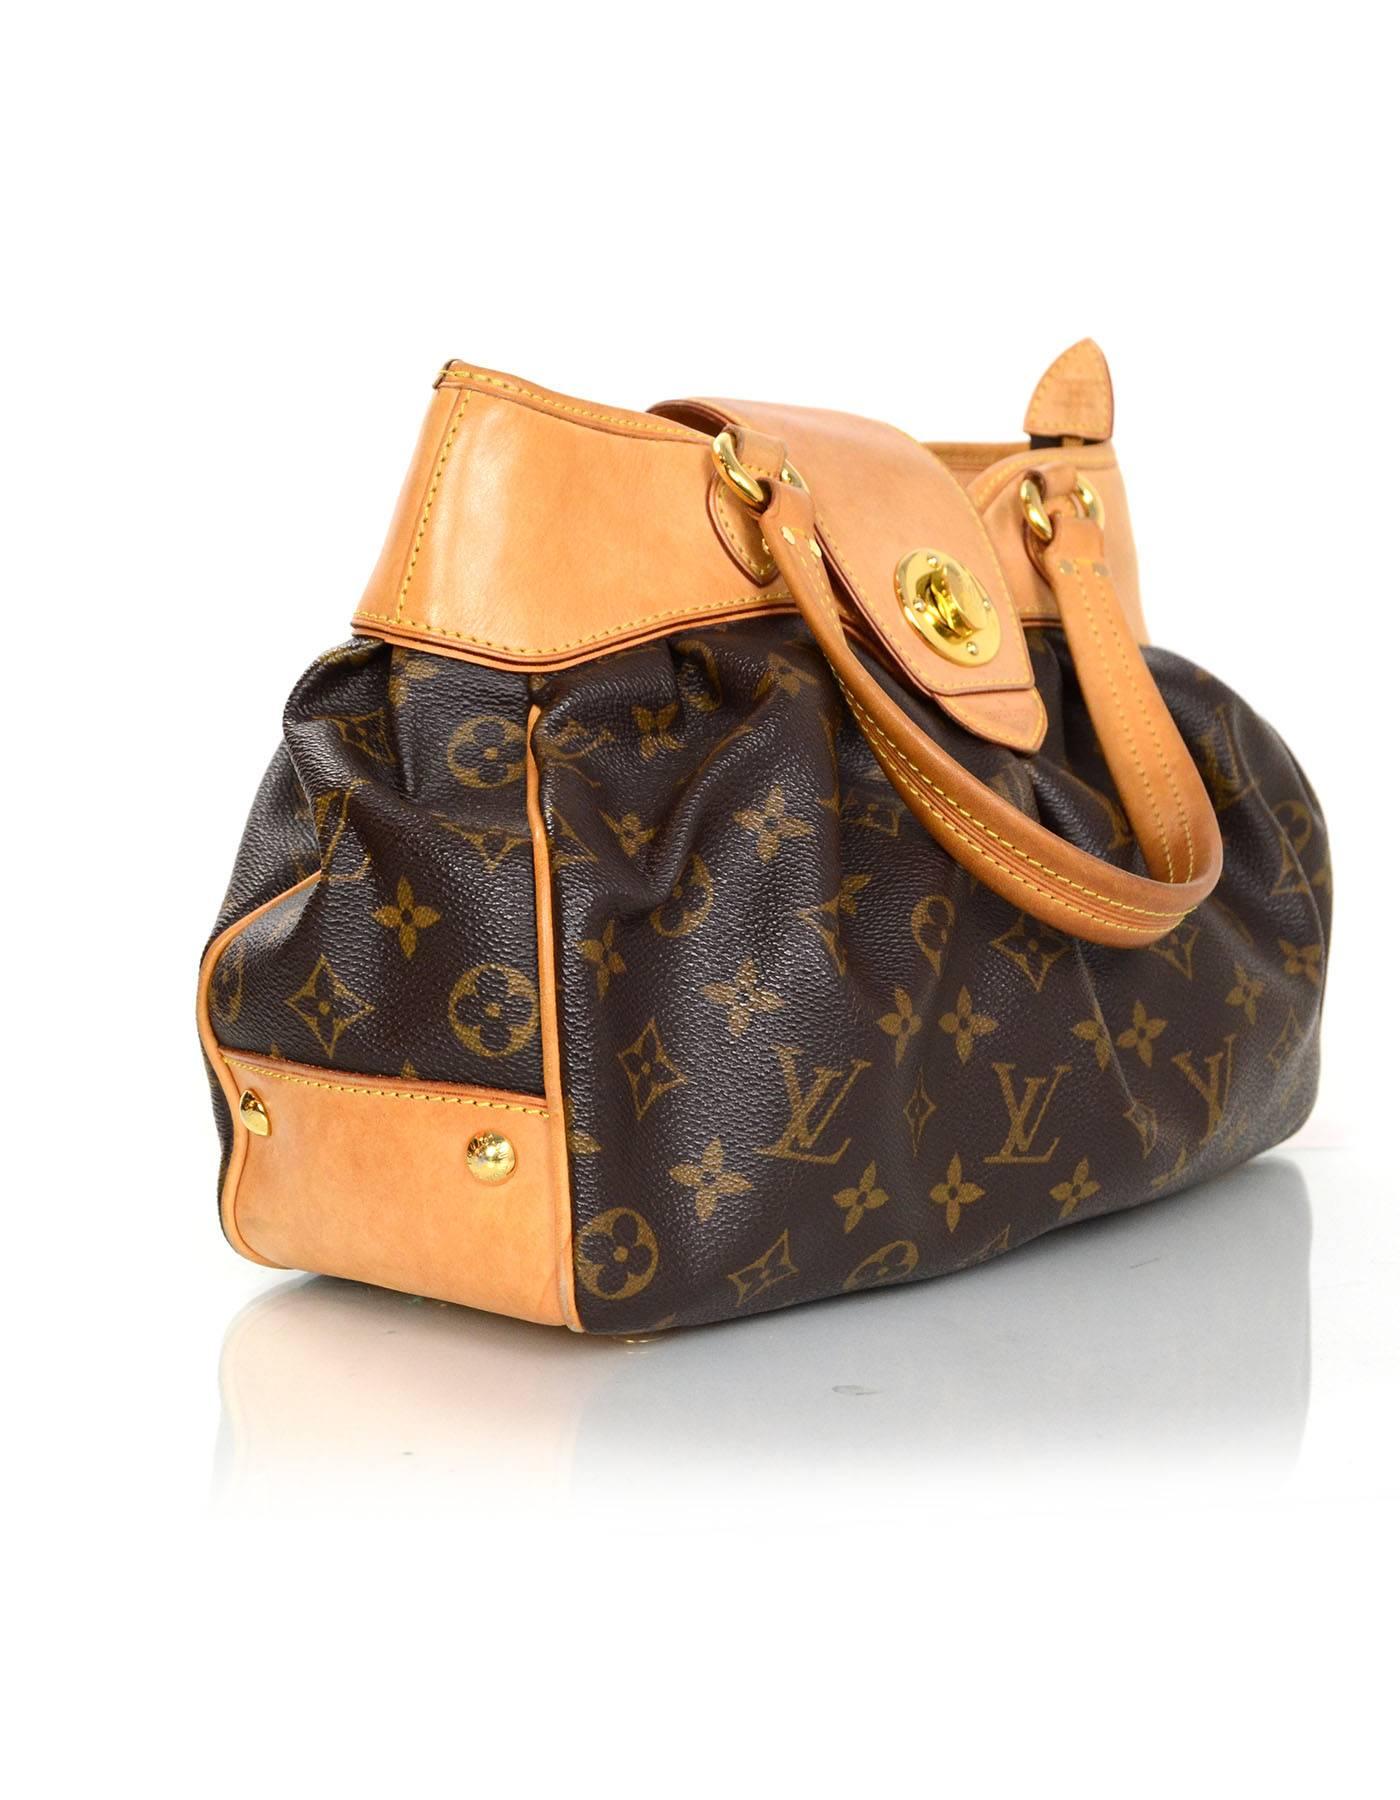 Louis Vuitton Monogram Boetie PM Bag
Features tan leather trim throughout

Made In: France
Year of Production: 2009
Color: Brown and tan
Hardware: Goldtone
Materials: Coated canvas and leather
Lining: Nude microfiber
Closure/Opening: Zip